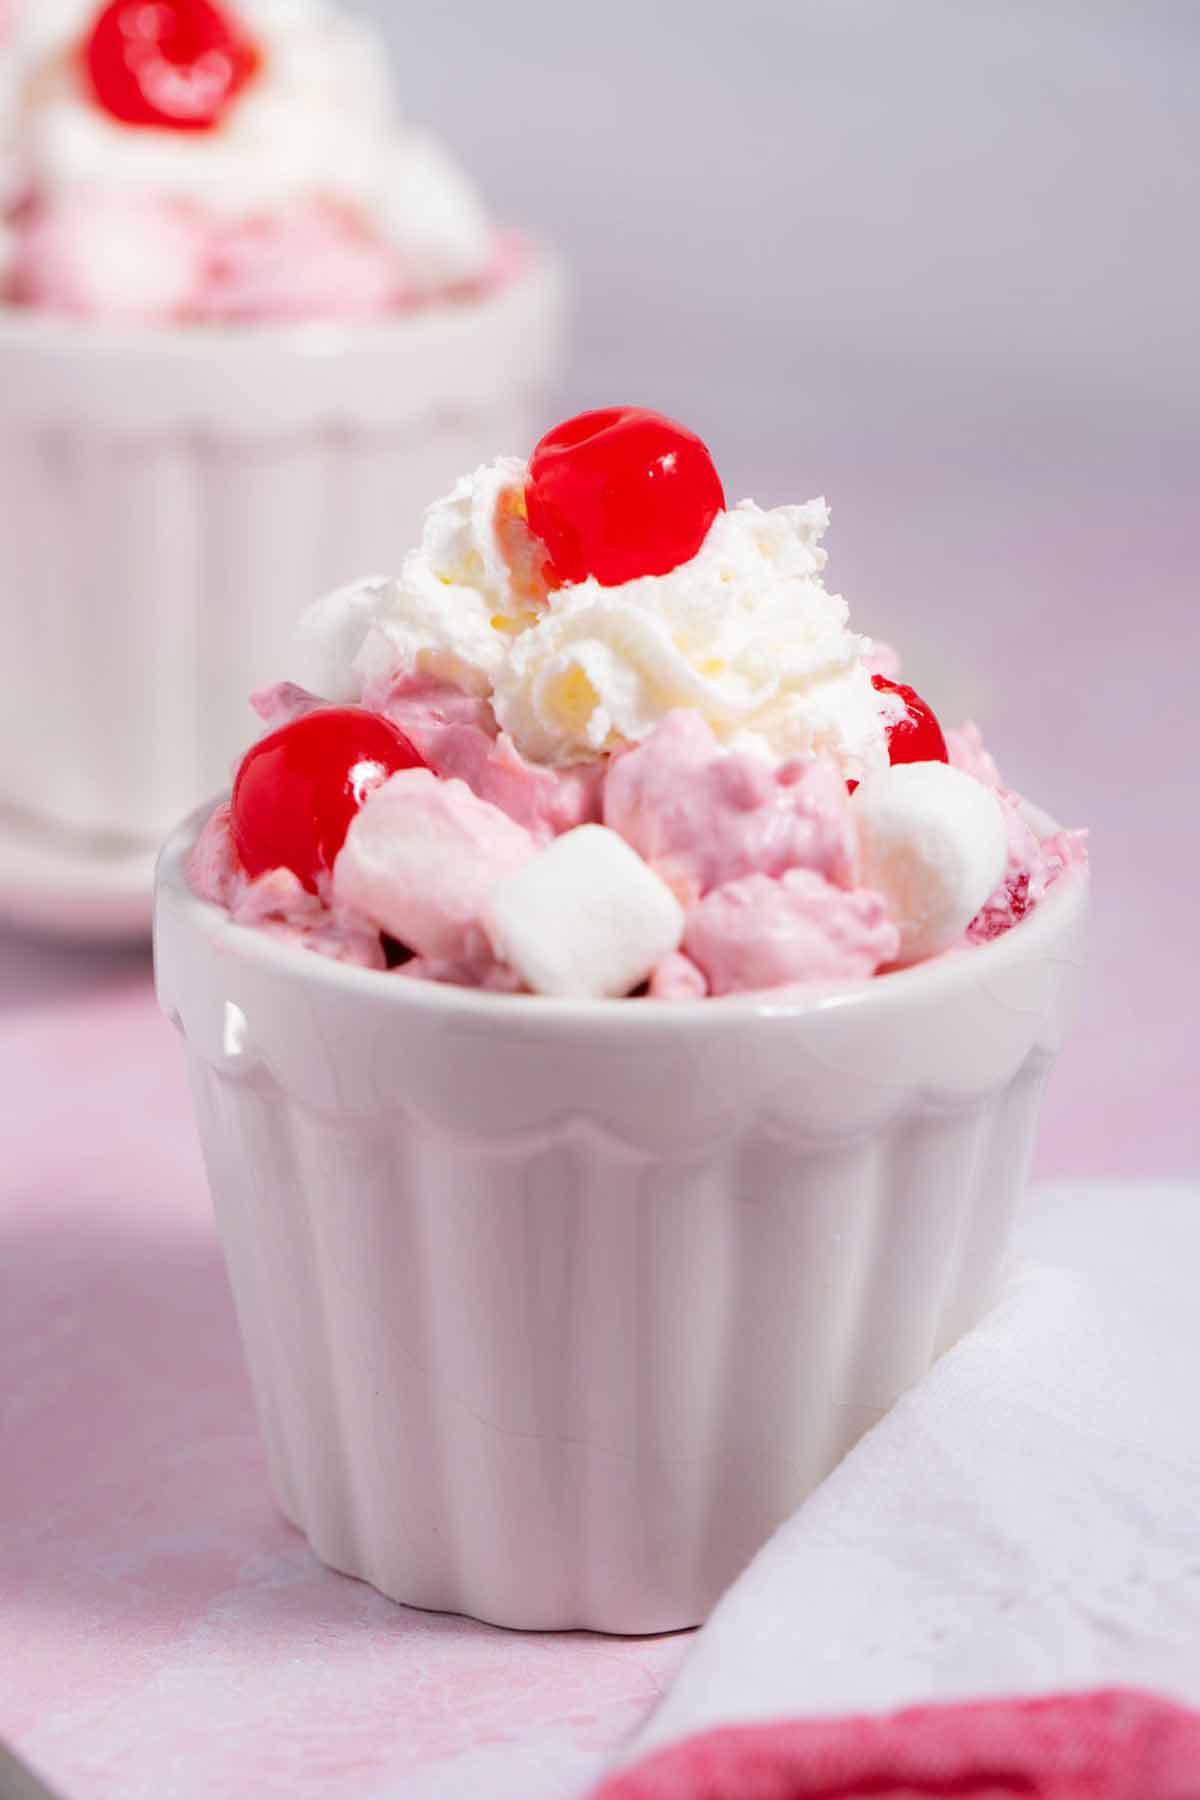 Small cup of cherry fluff salad with Cool Whip and a cherry on top.